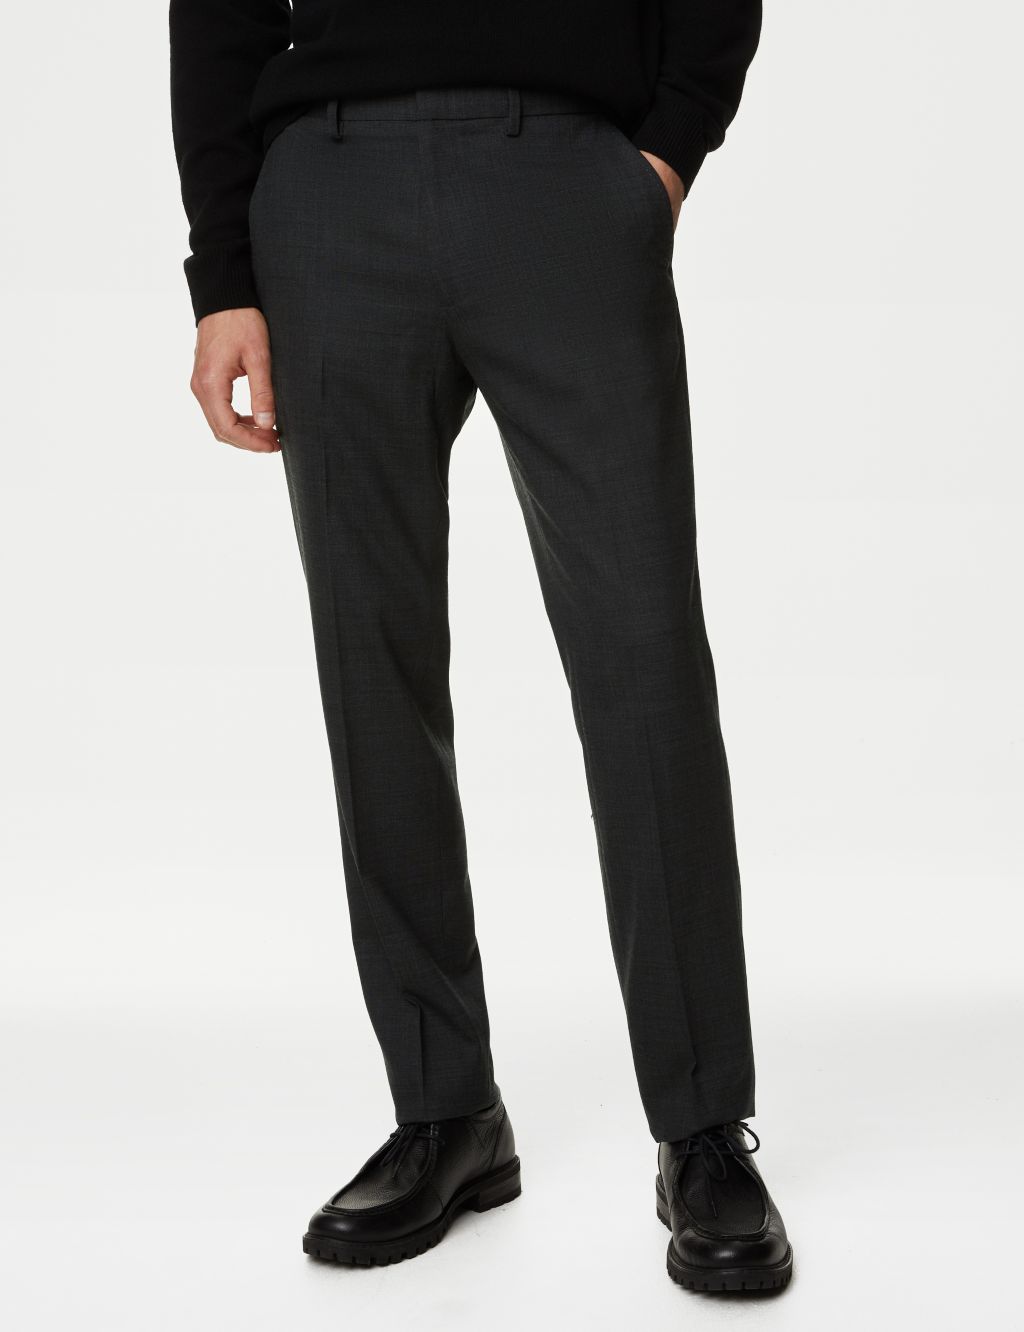 Wool Blend Flat Front Stretch Trousers image 3